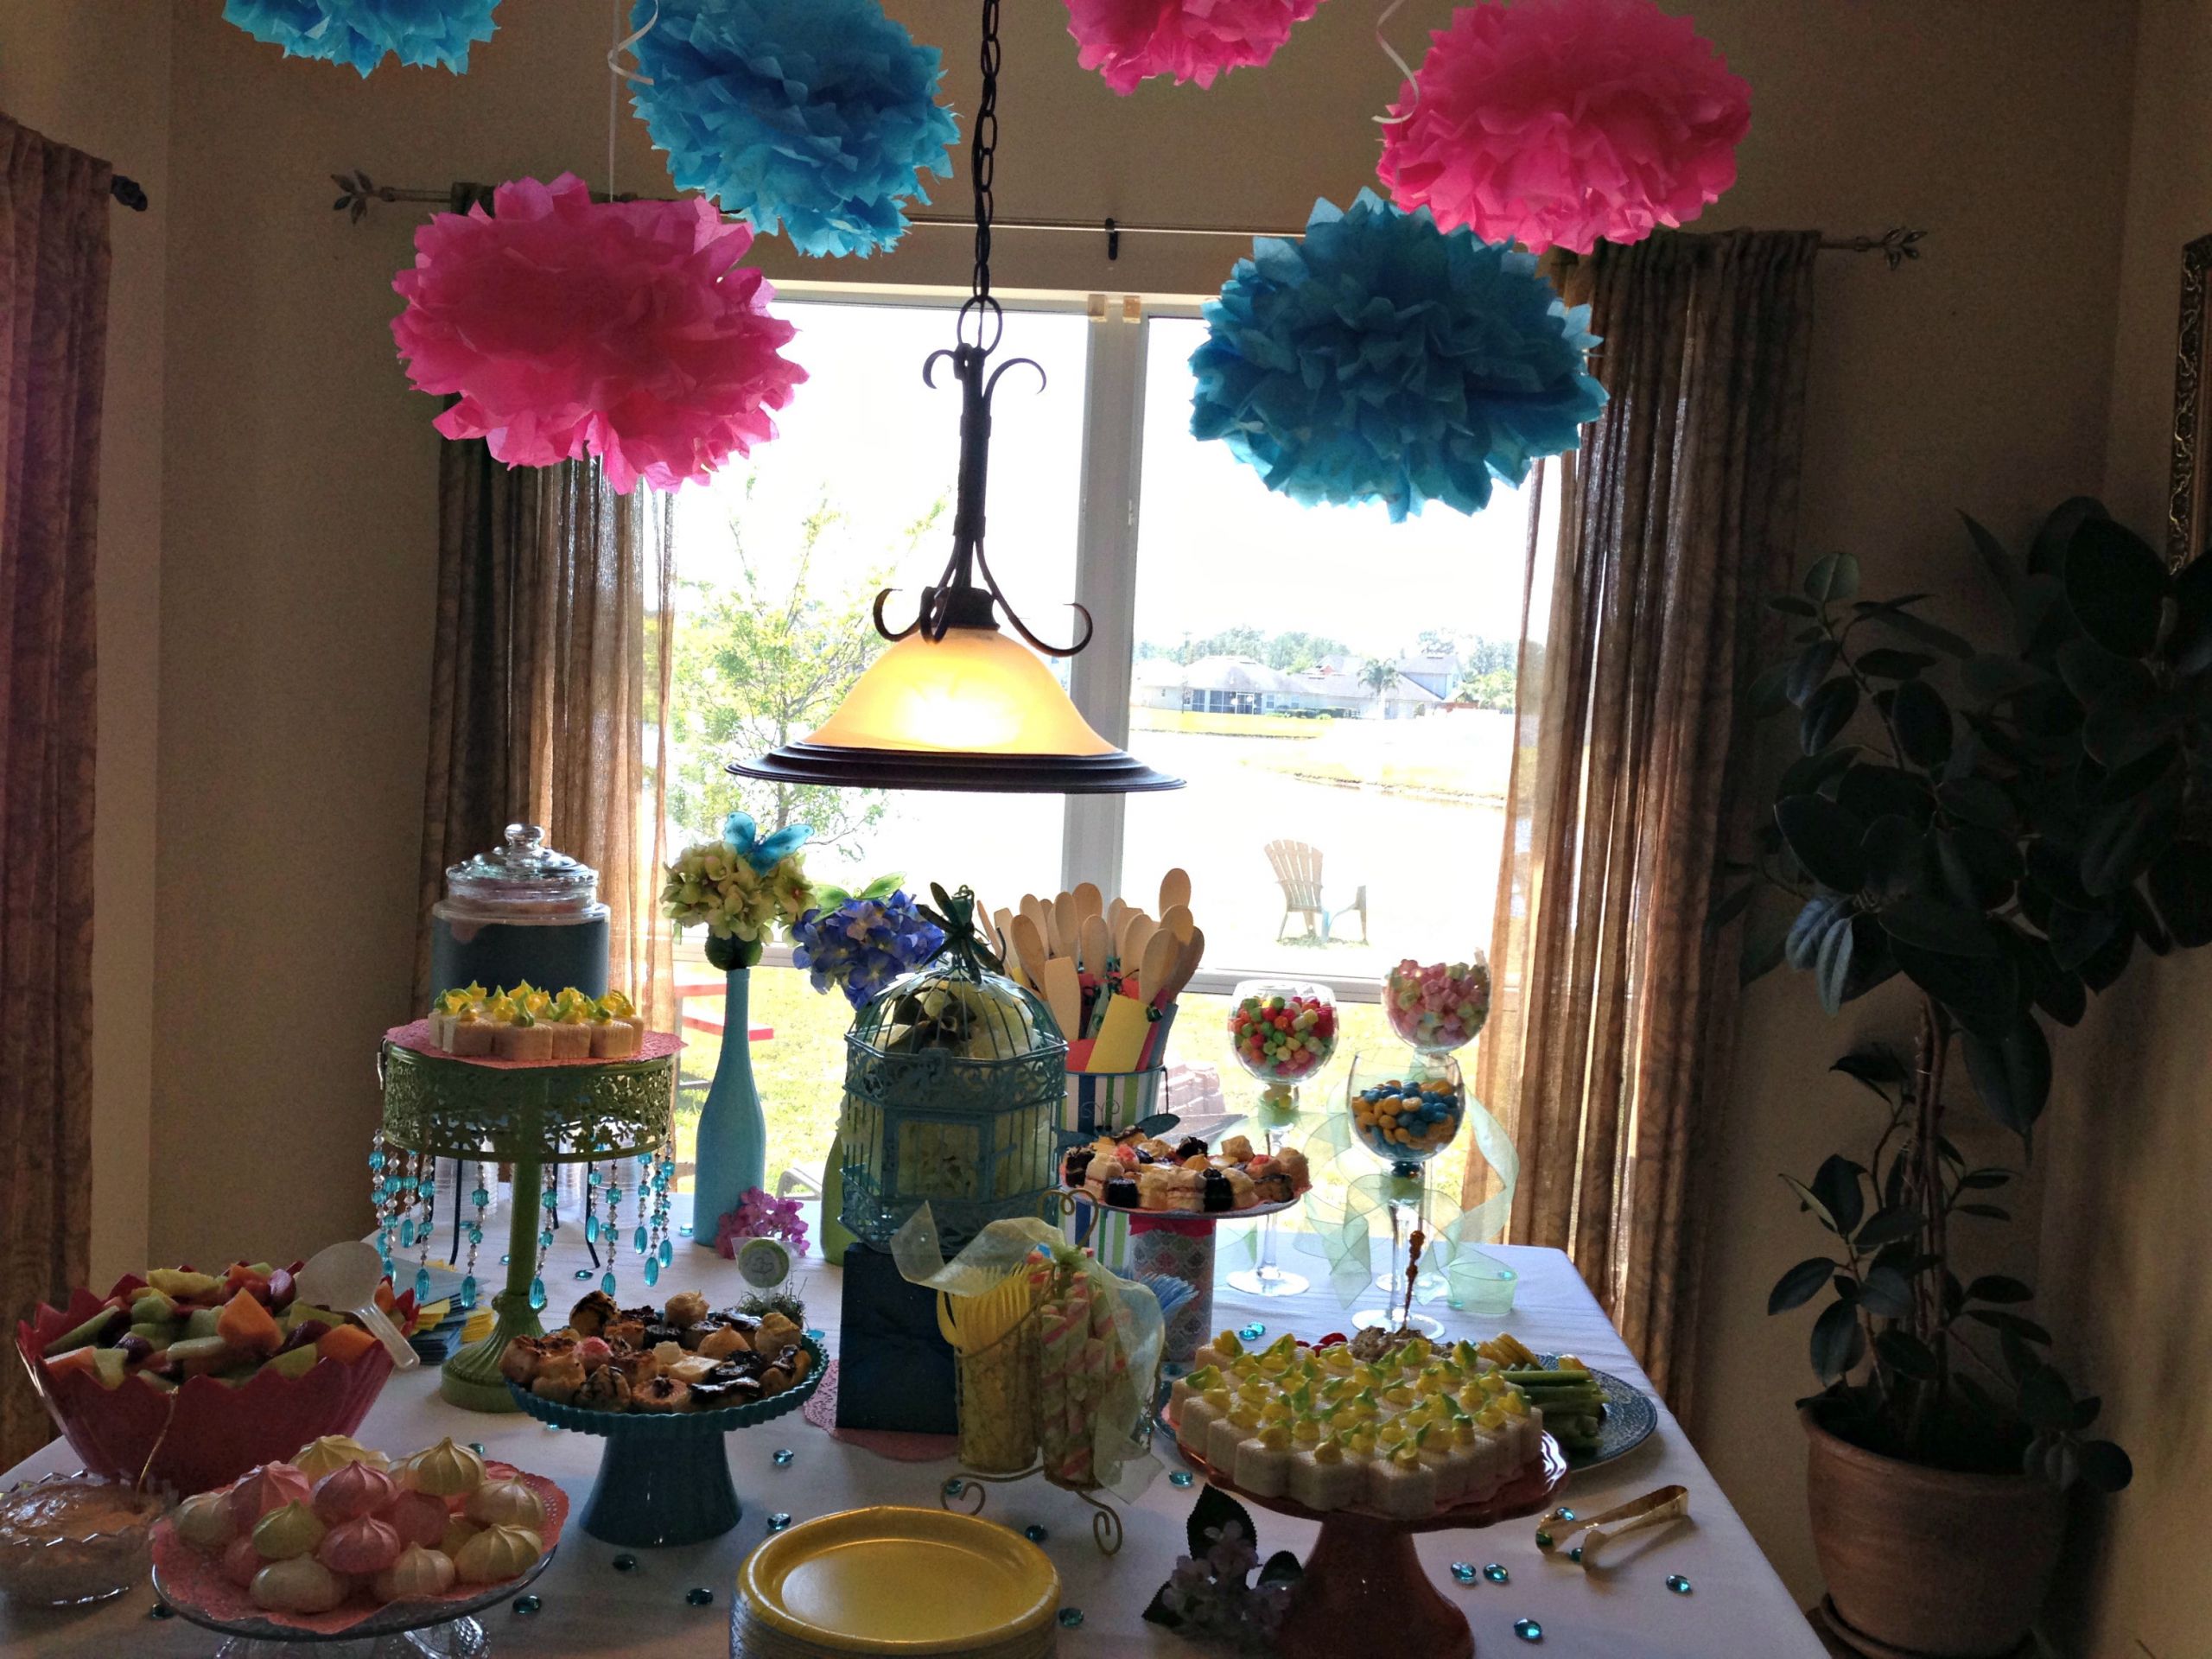 Engagement Party Ideas On Pinterest
 Easy DIY Bridal Shower Ideas from Pinterest – Wel e to